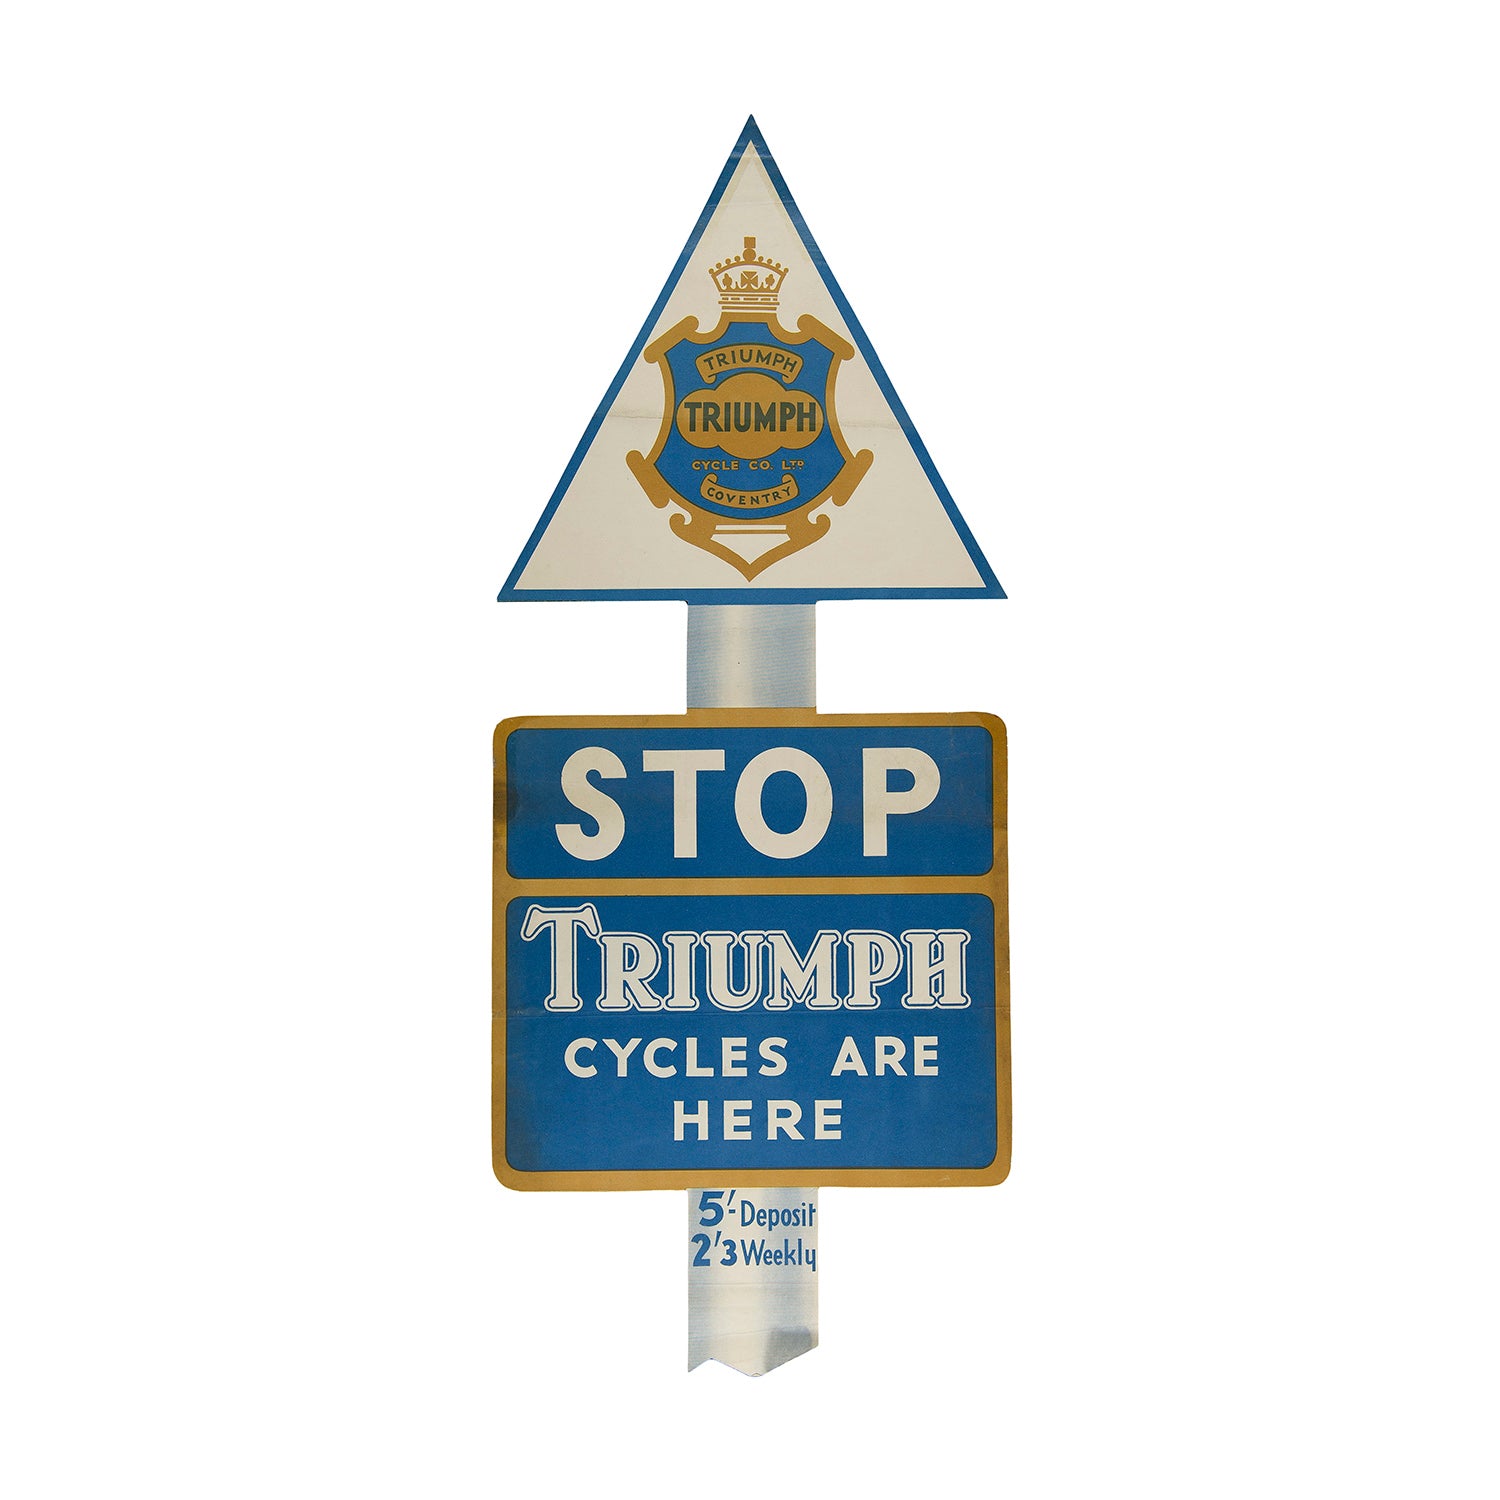 Stop. Triumph Cycles are here